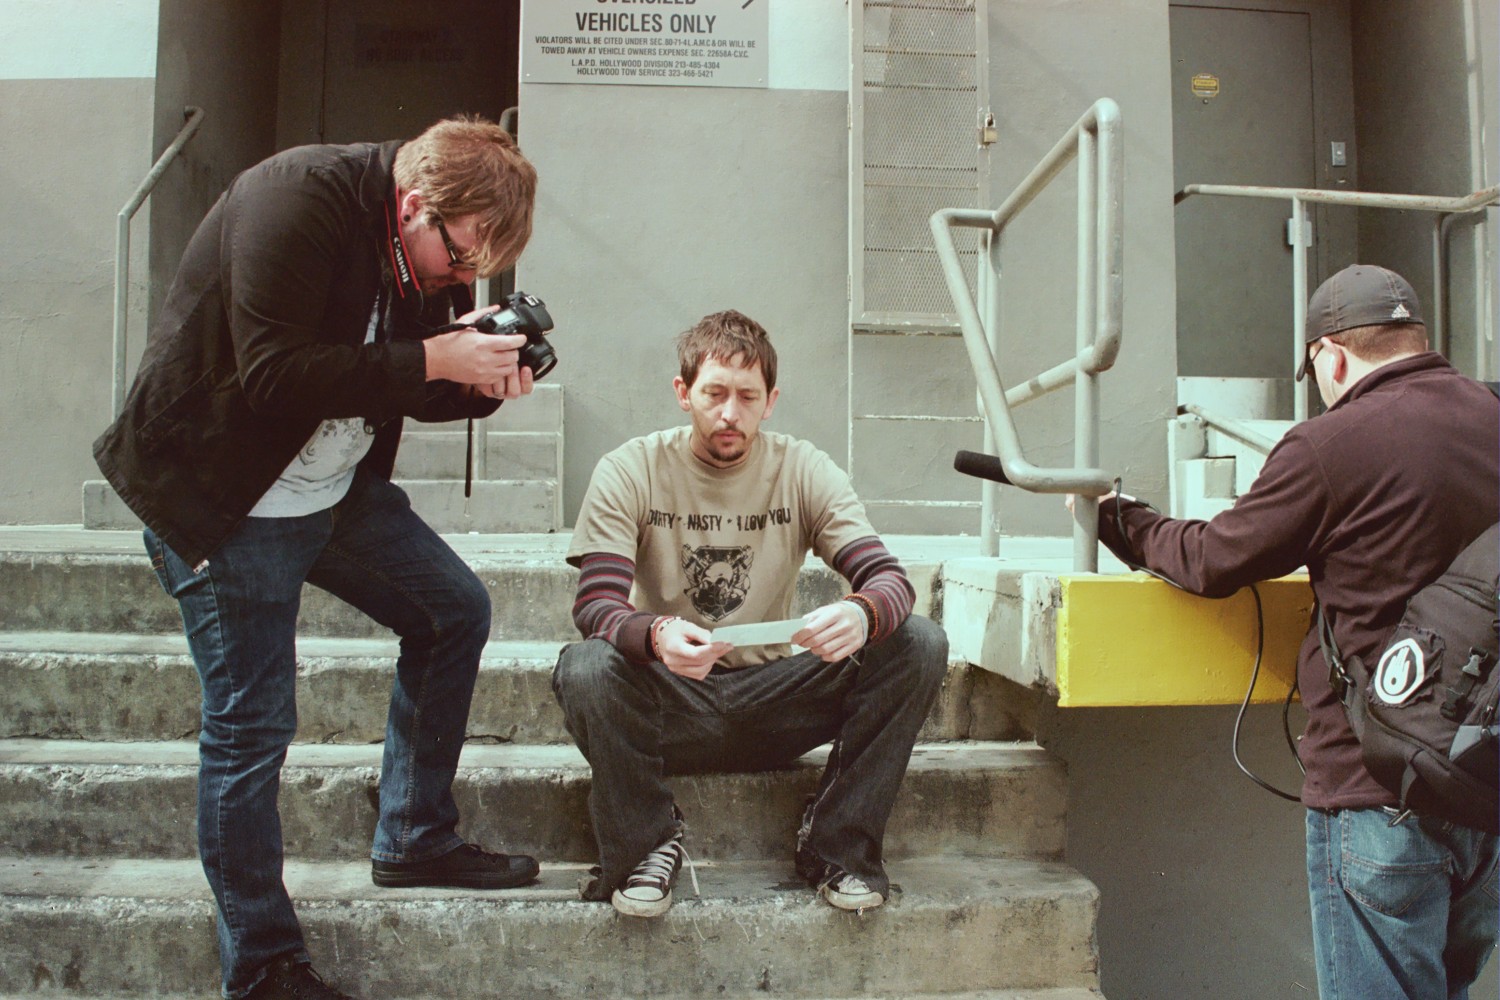 On Location: Actor Donnie Faught, Director Benjamin Ironside Koppin and Producer Matthew John Koppin